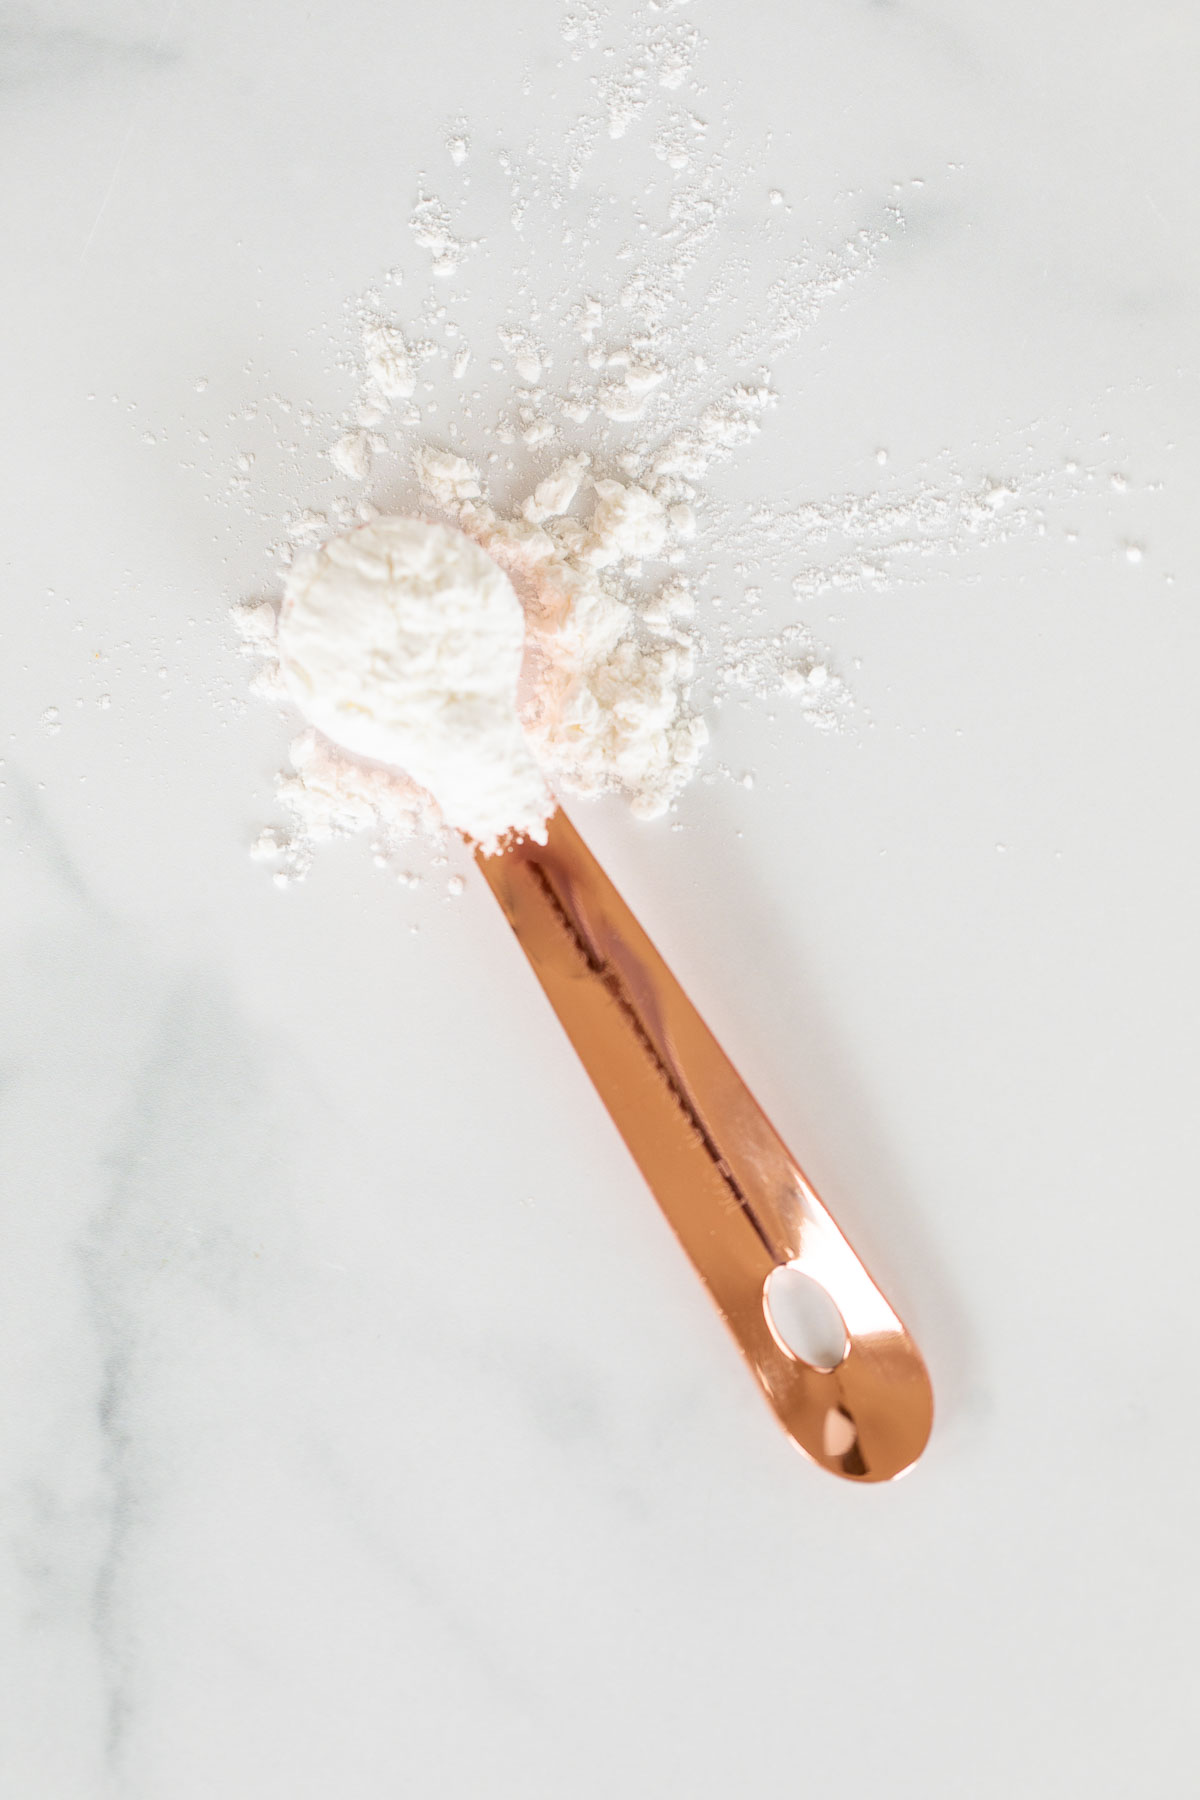 measuring spoon with white powder on it